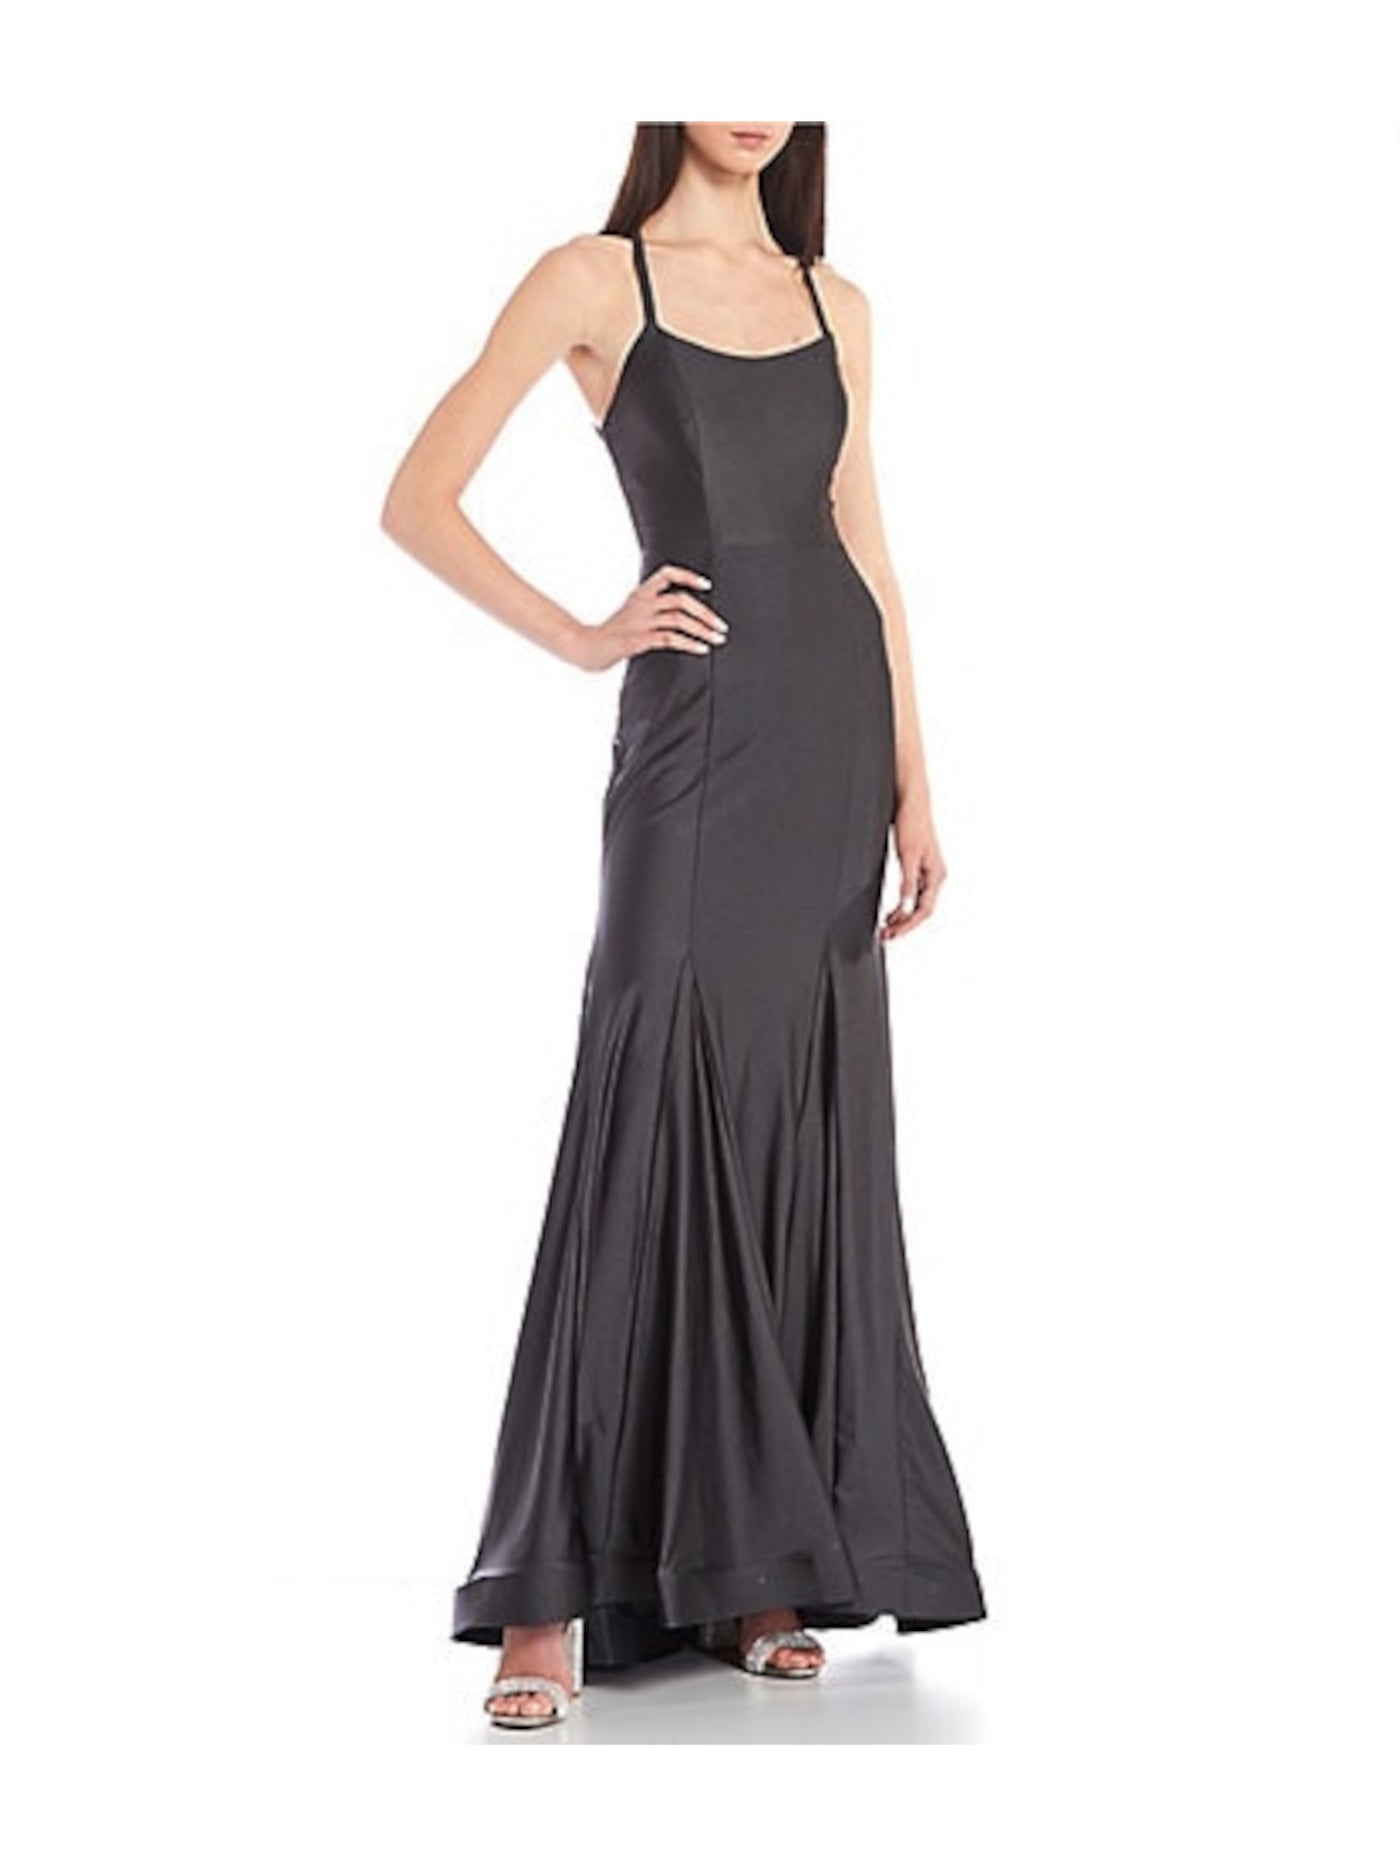 BLONDIE Womens Gray Stretch Zippered Illusion Panel Cutout Back Lined Sleeveless Scoop Neck Full-Length Formal Gown Dress Juniors 7